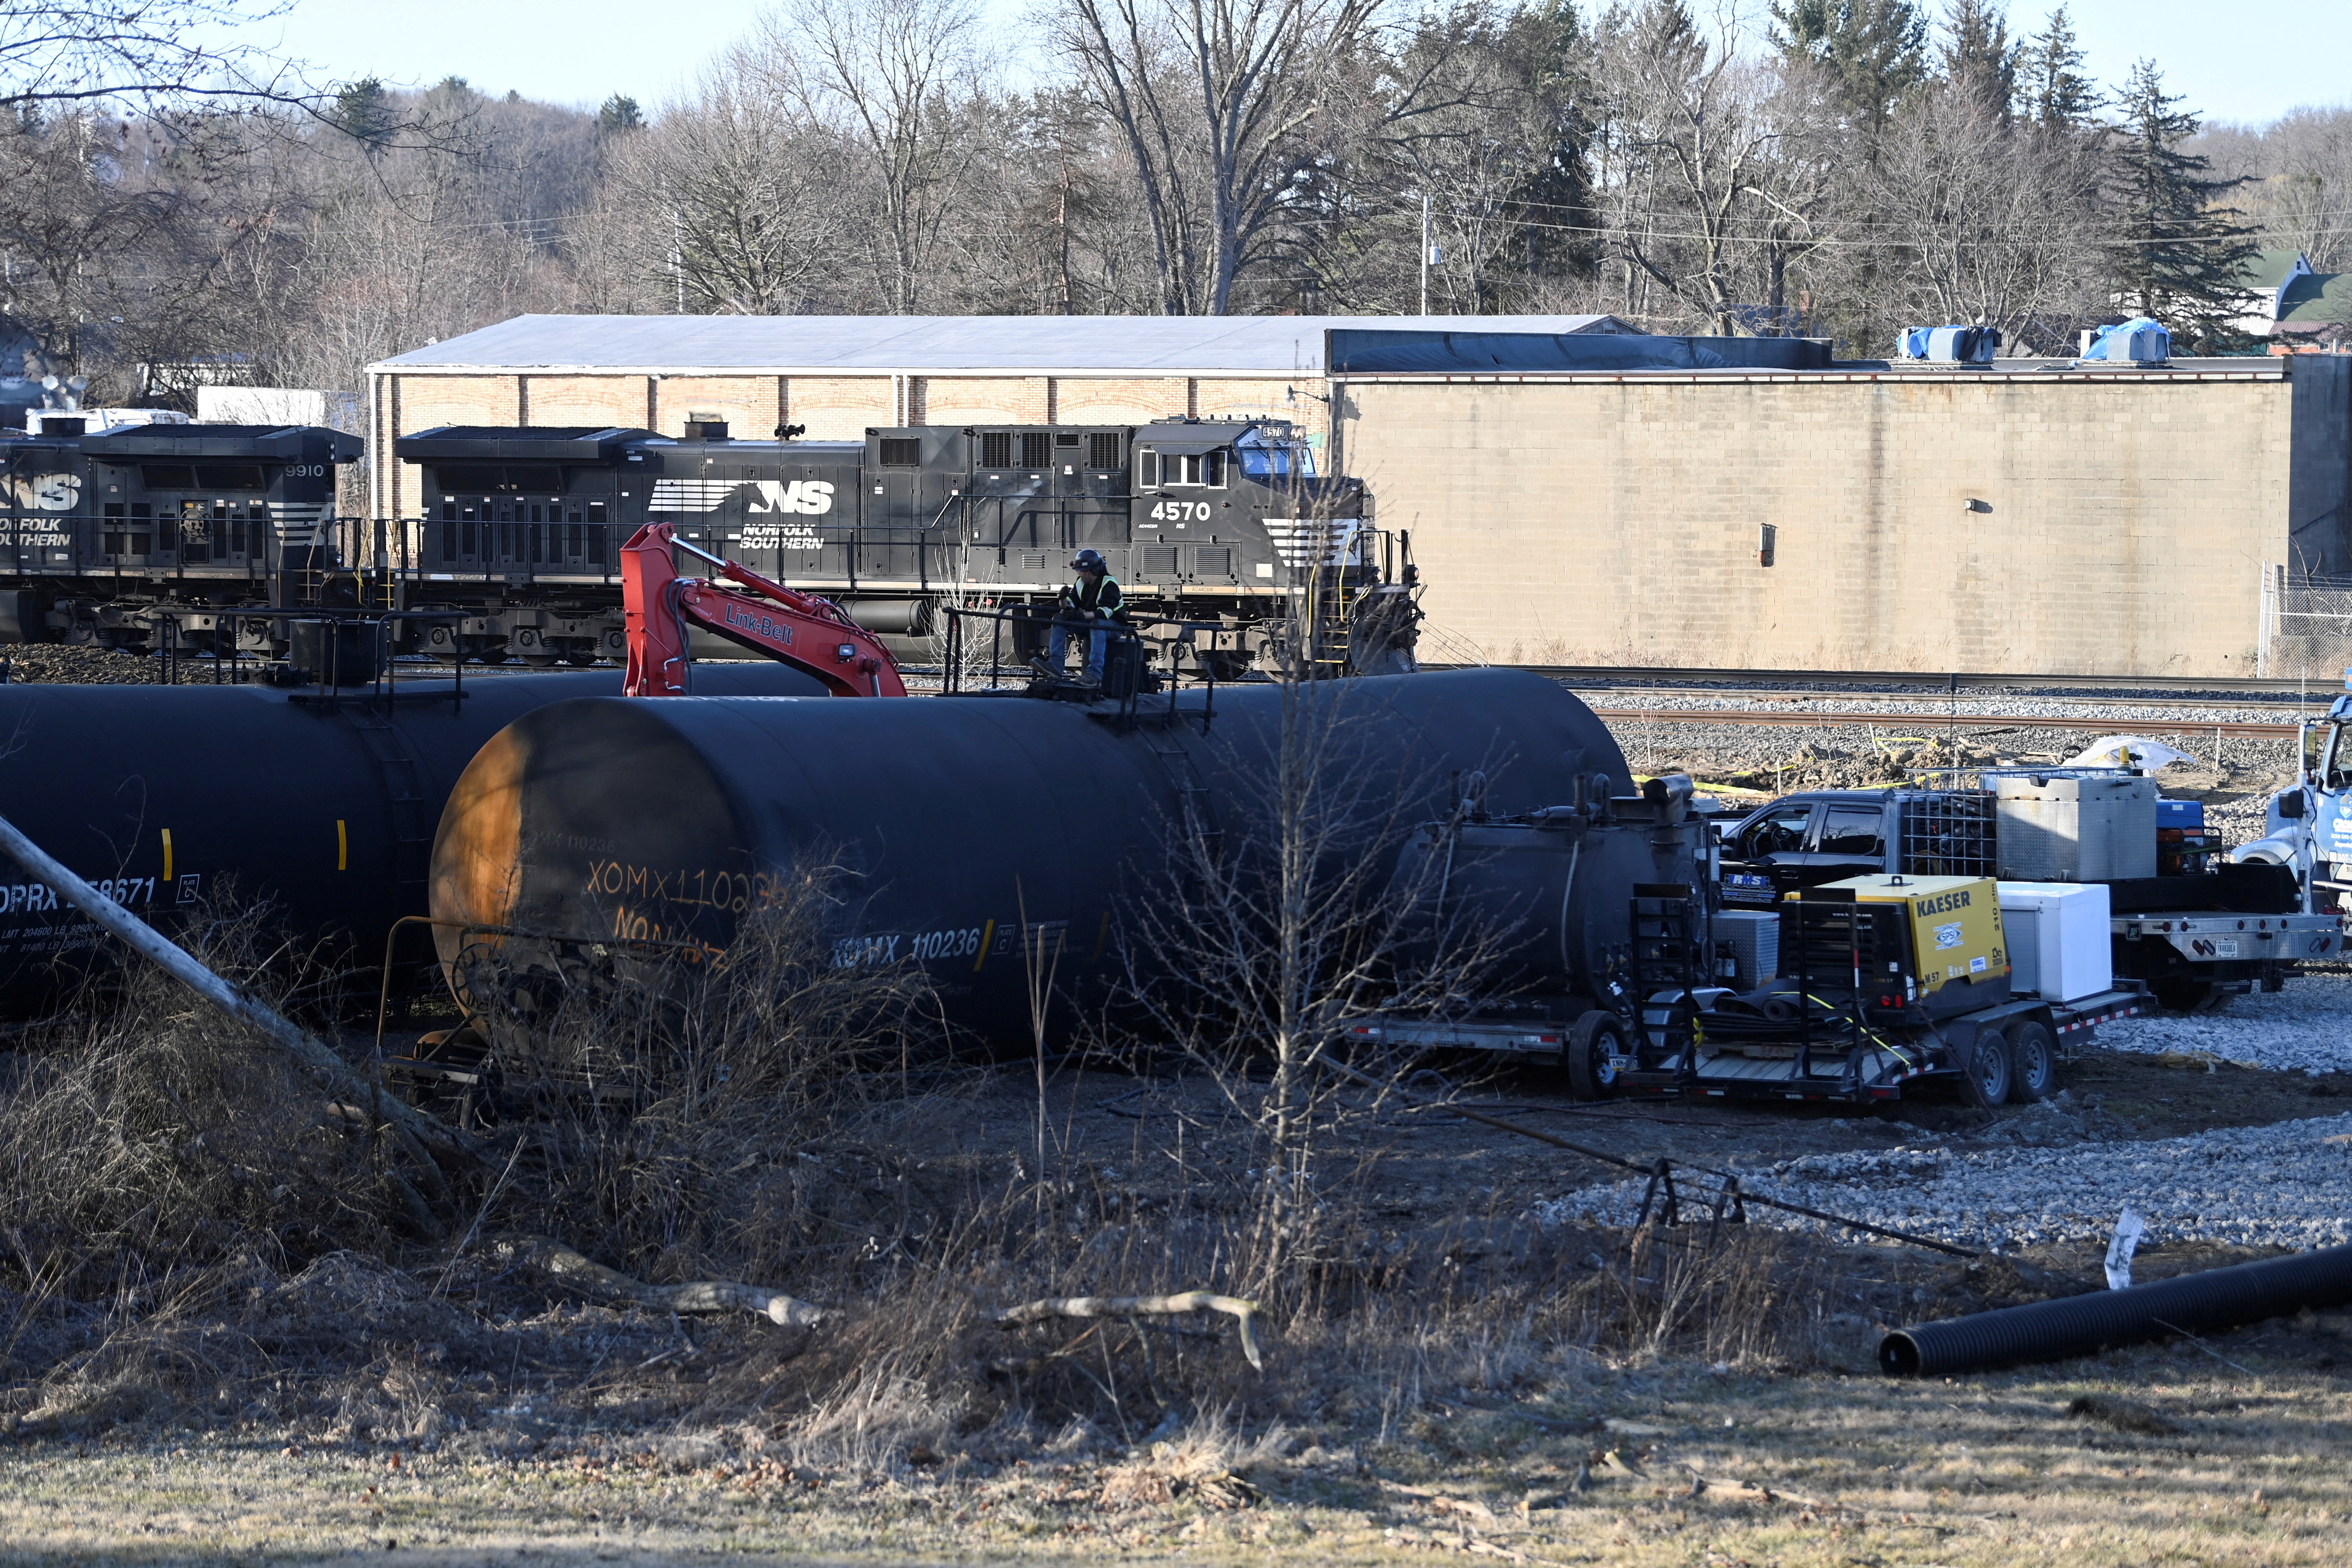 A general view of the site where toxic chemicals were spilled following a train derailment, in East Palestine